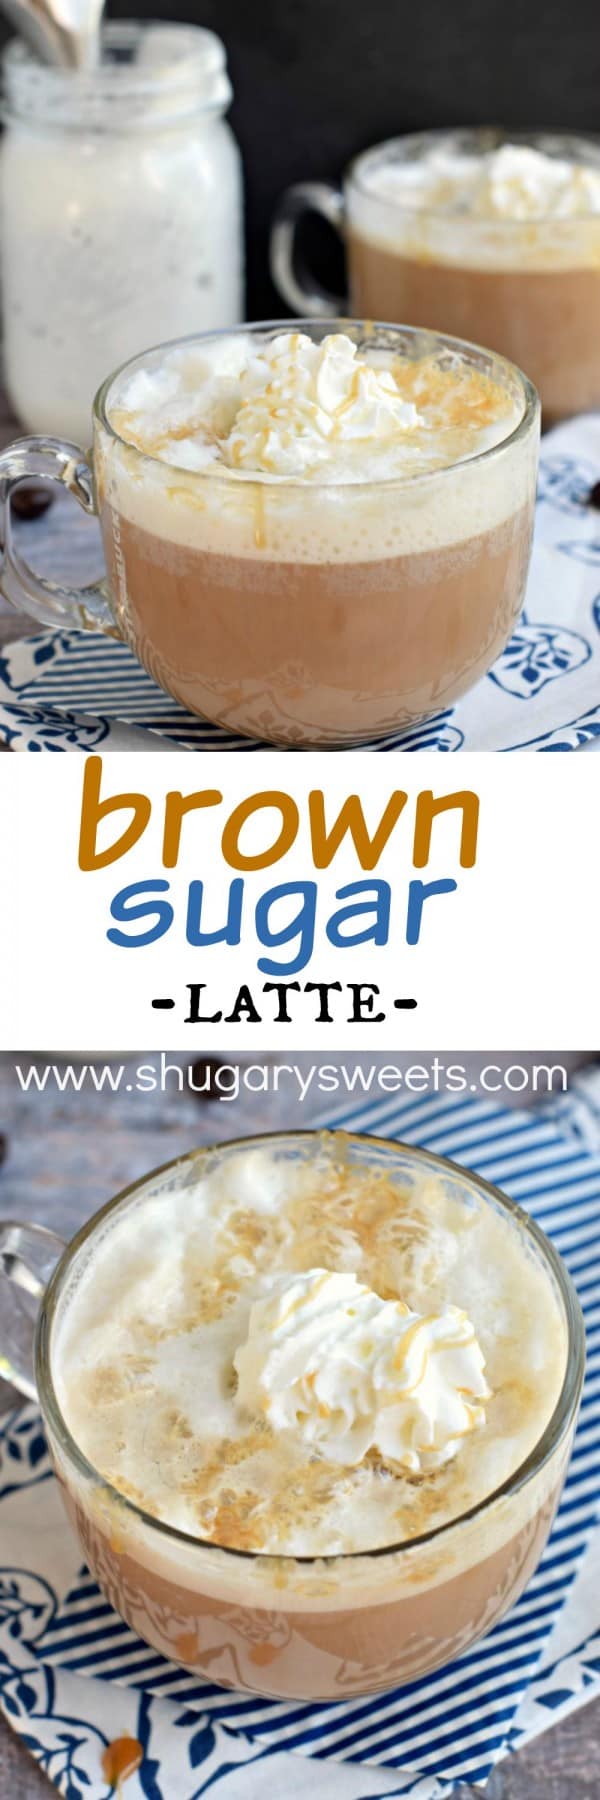 Enjoy homemade coffeehouse drinks at home! This Brown Sugar Latte is not only delicious, but it's easy to make too!